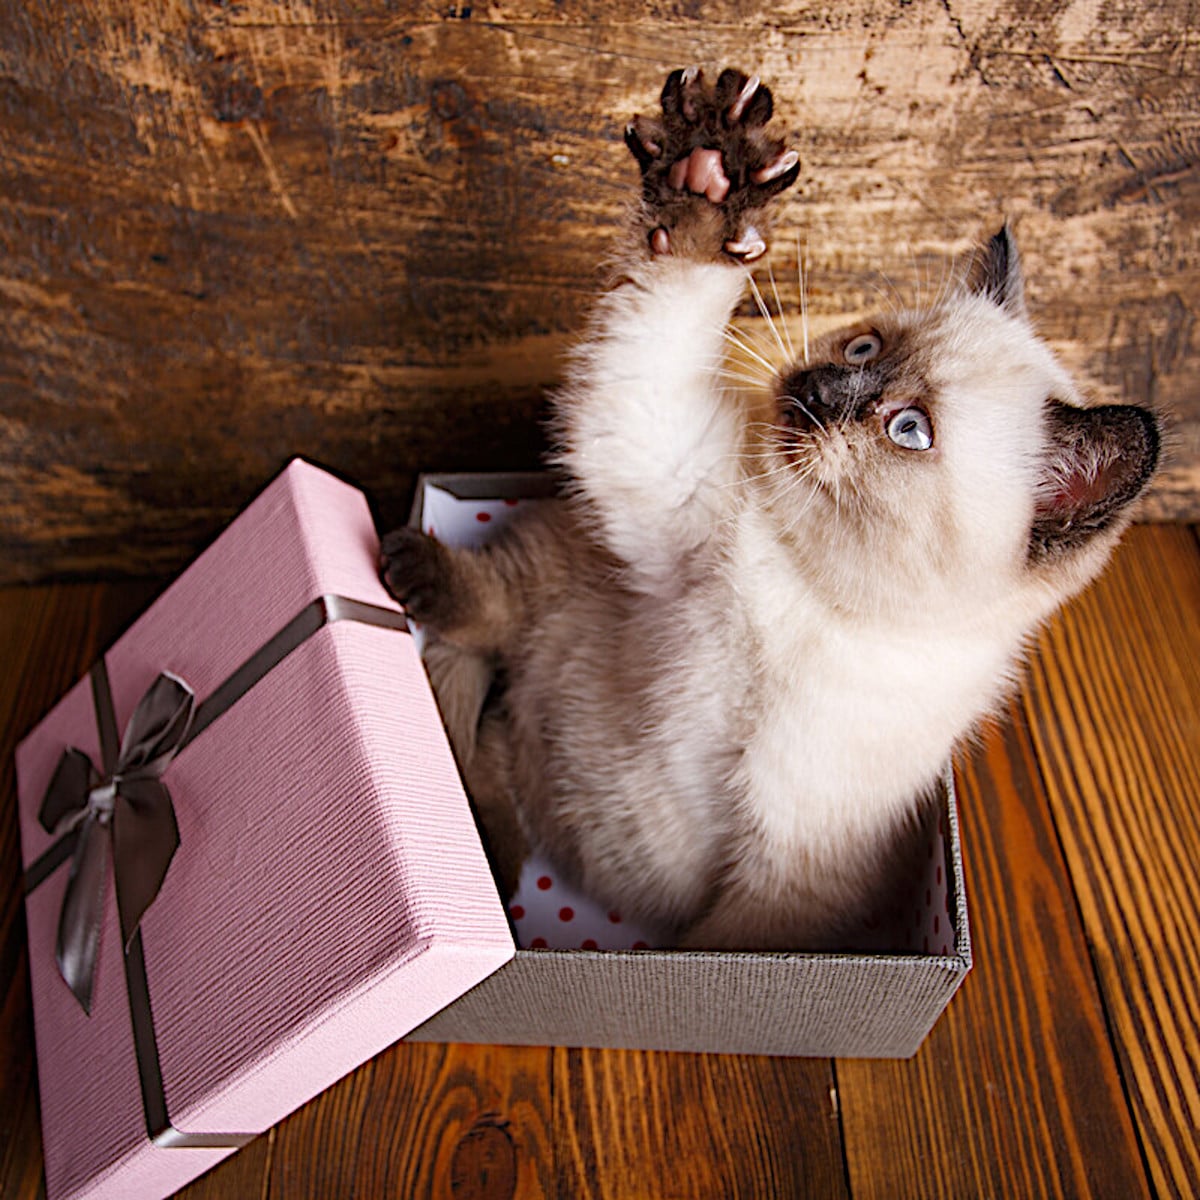 Cat jumping from a gift box with paw extended and claw out